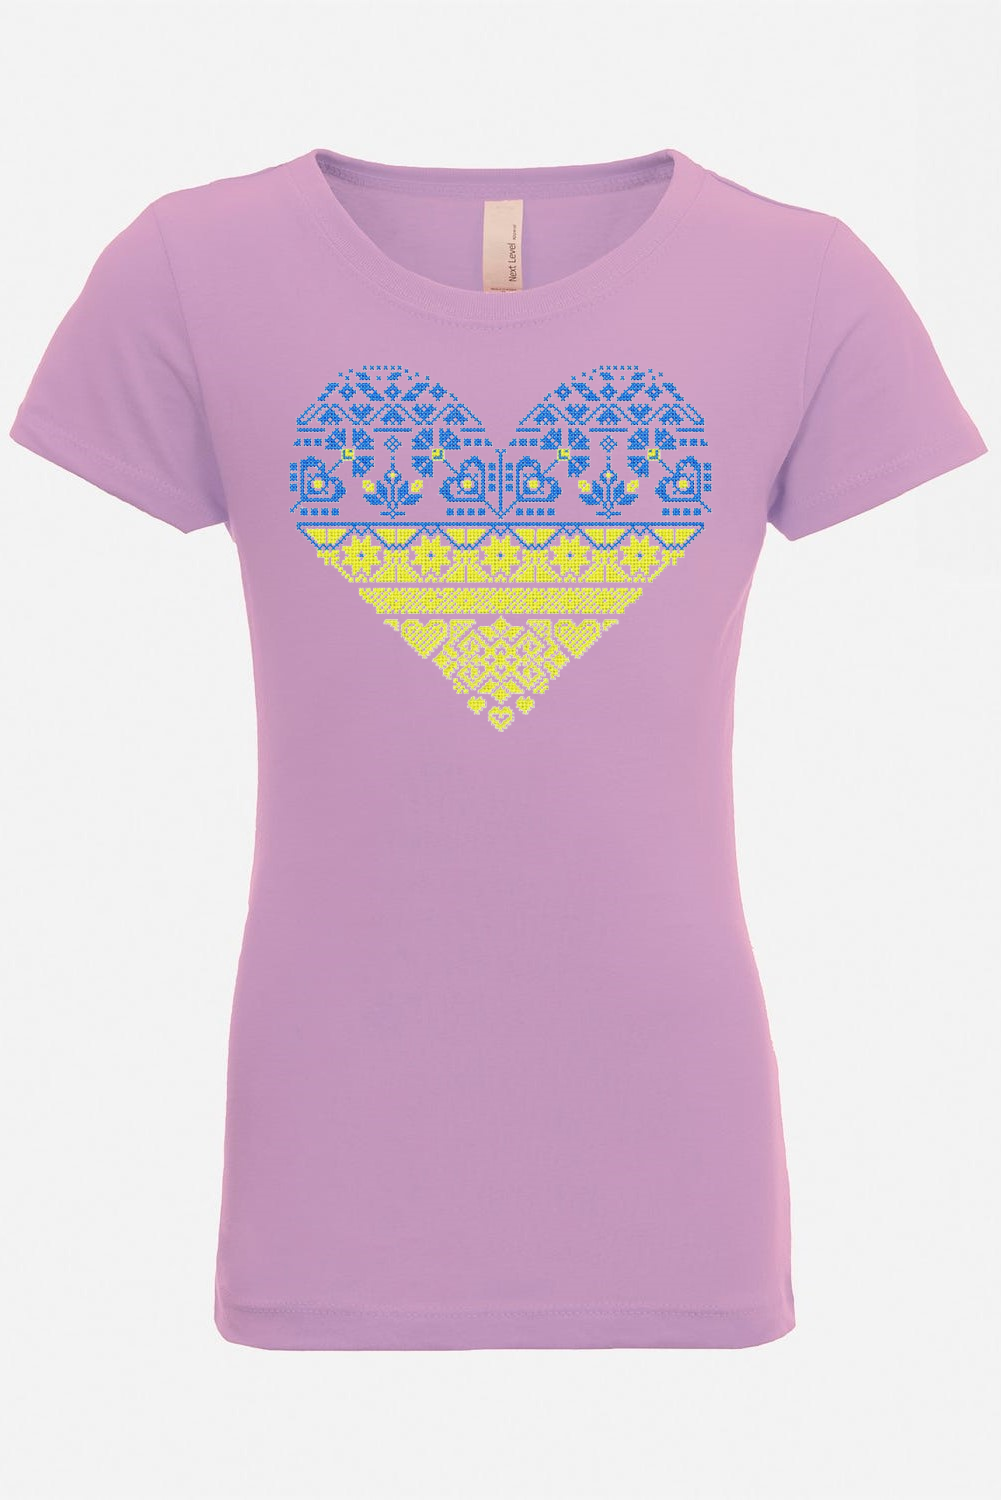 Girl's t-shirt "Blue and yellow heart"